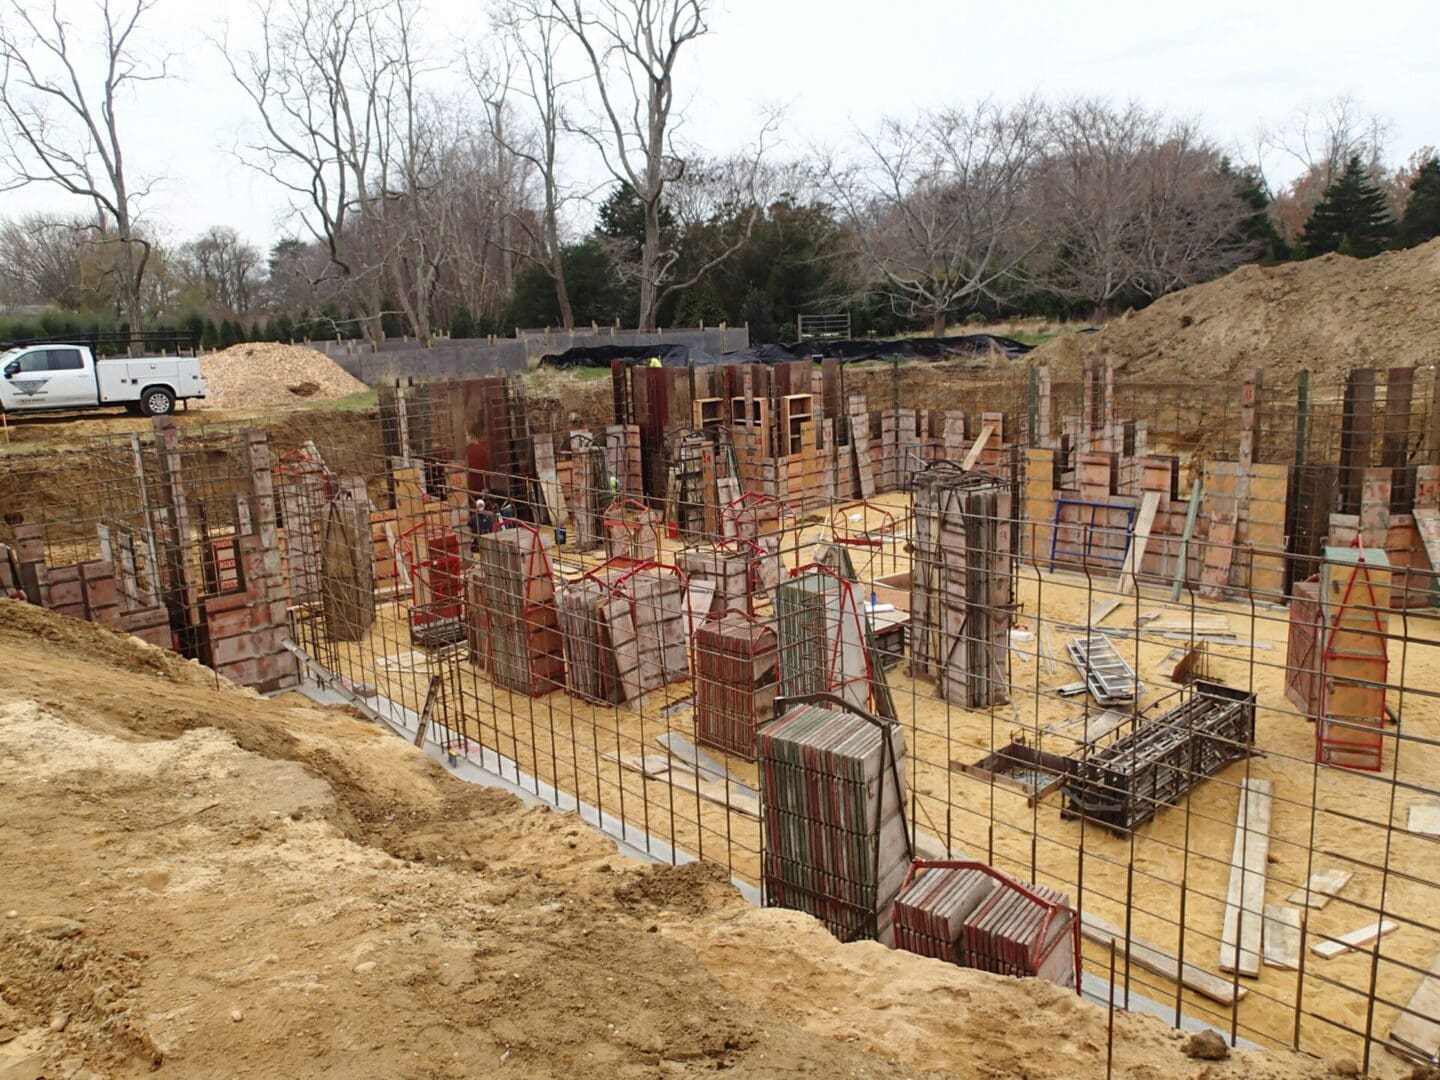 A construction site with many piles of bricks.